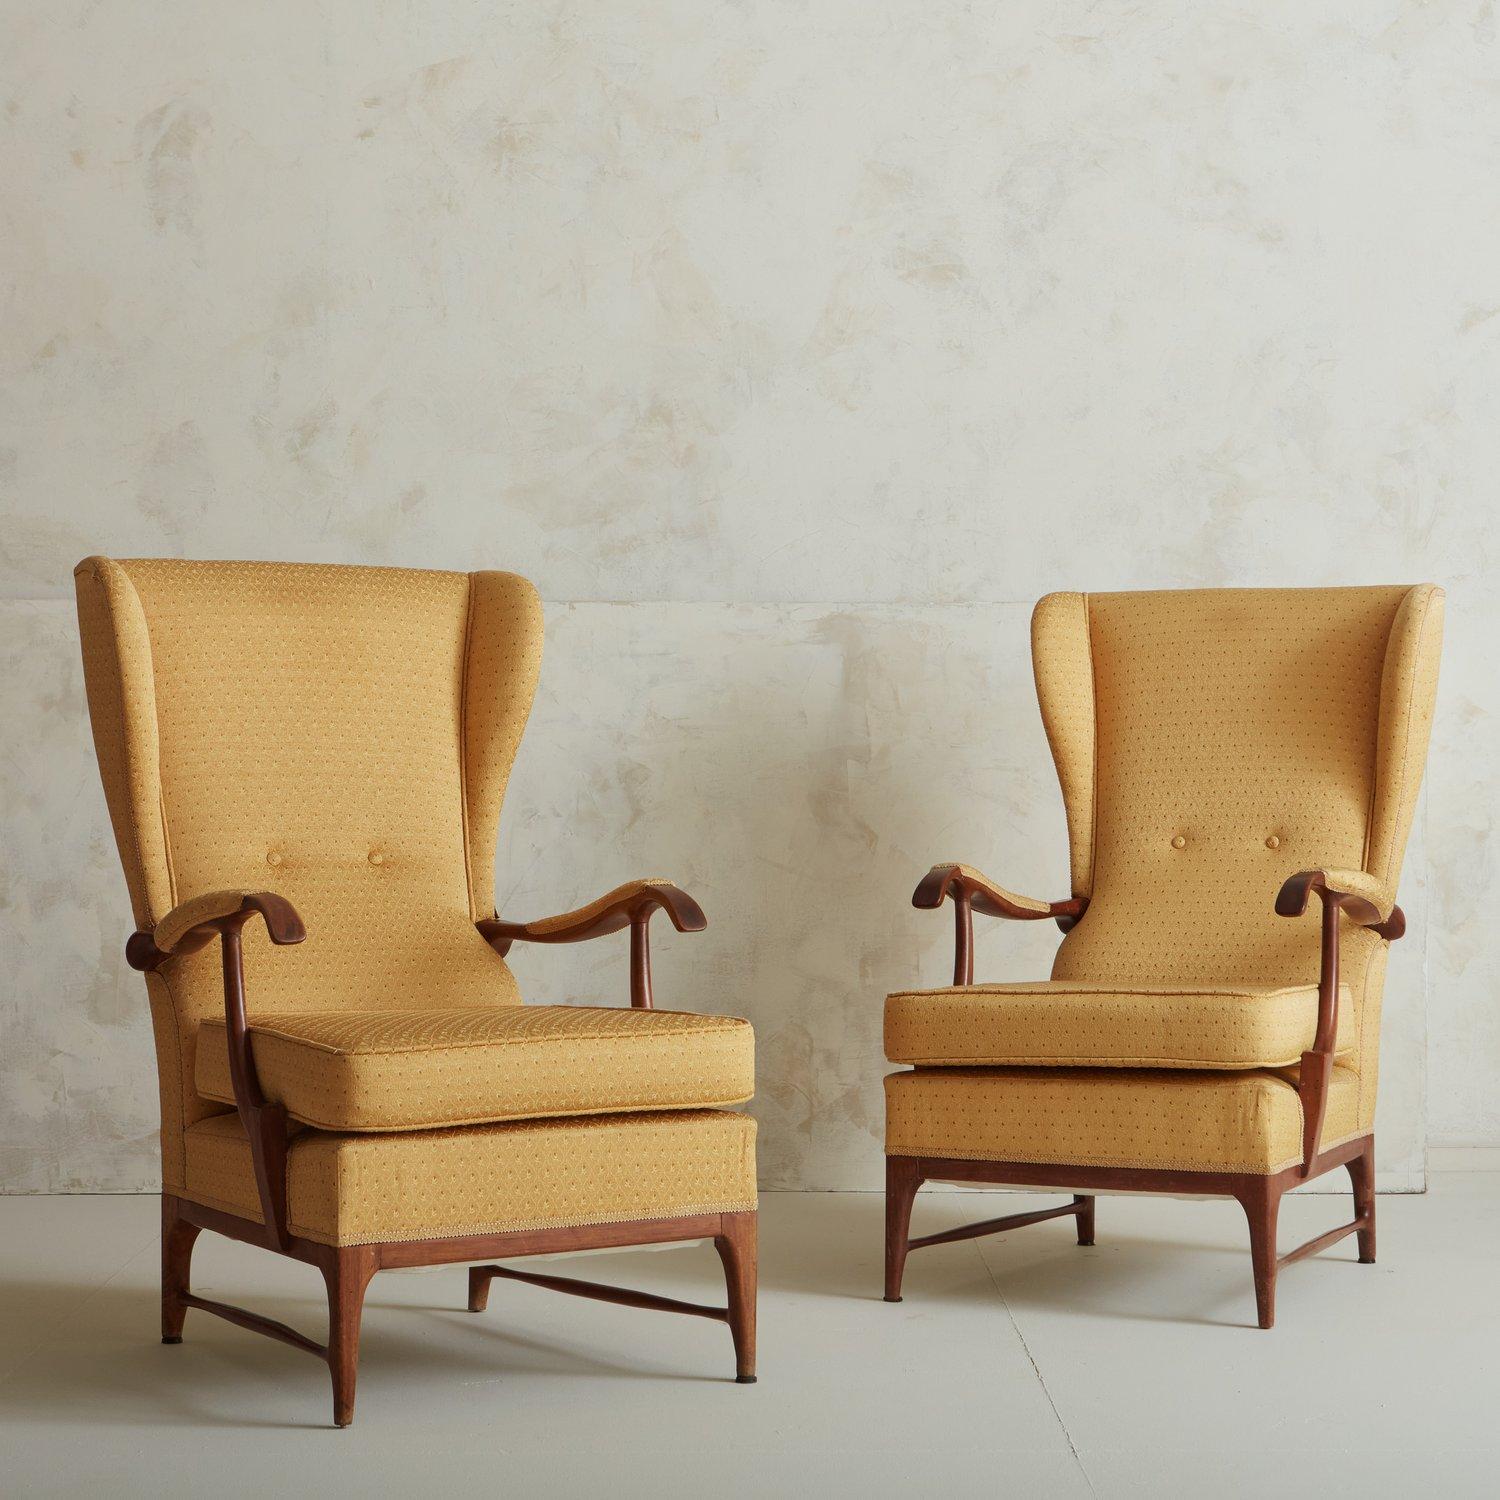 A handsome pair of vintage wingback lounge chairs in original yellow upholstery. These chairs feature wooden frames with stretchers on either side and dramatic tufted backs. Sourced in Italy, 20th century.